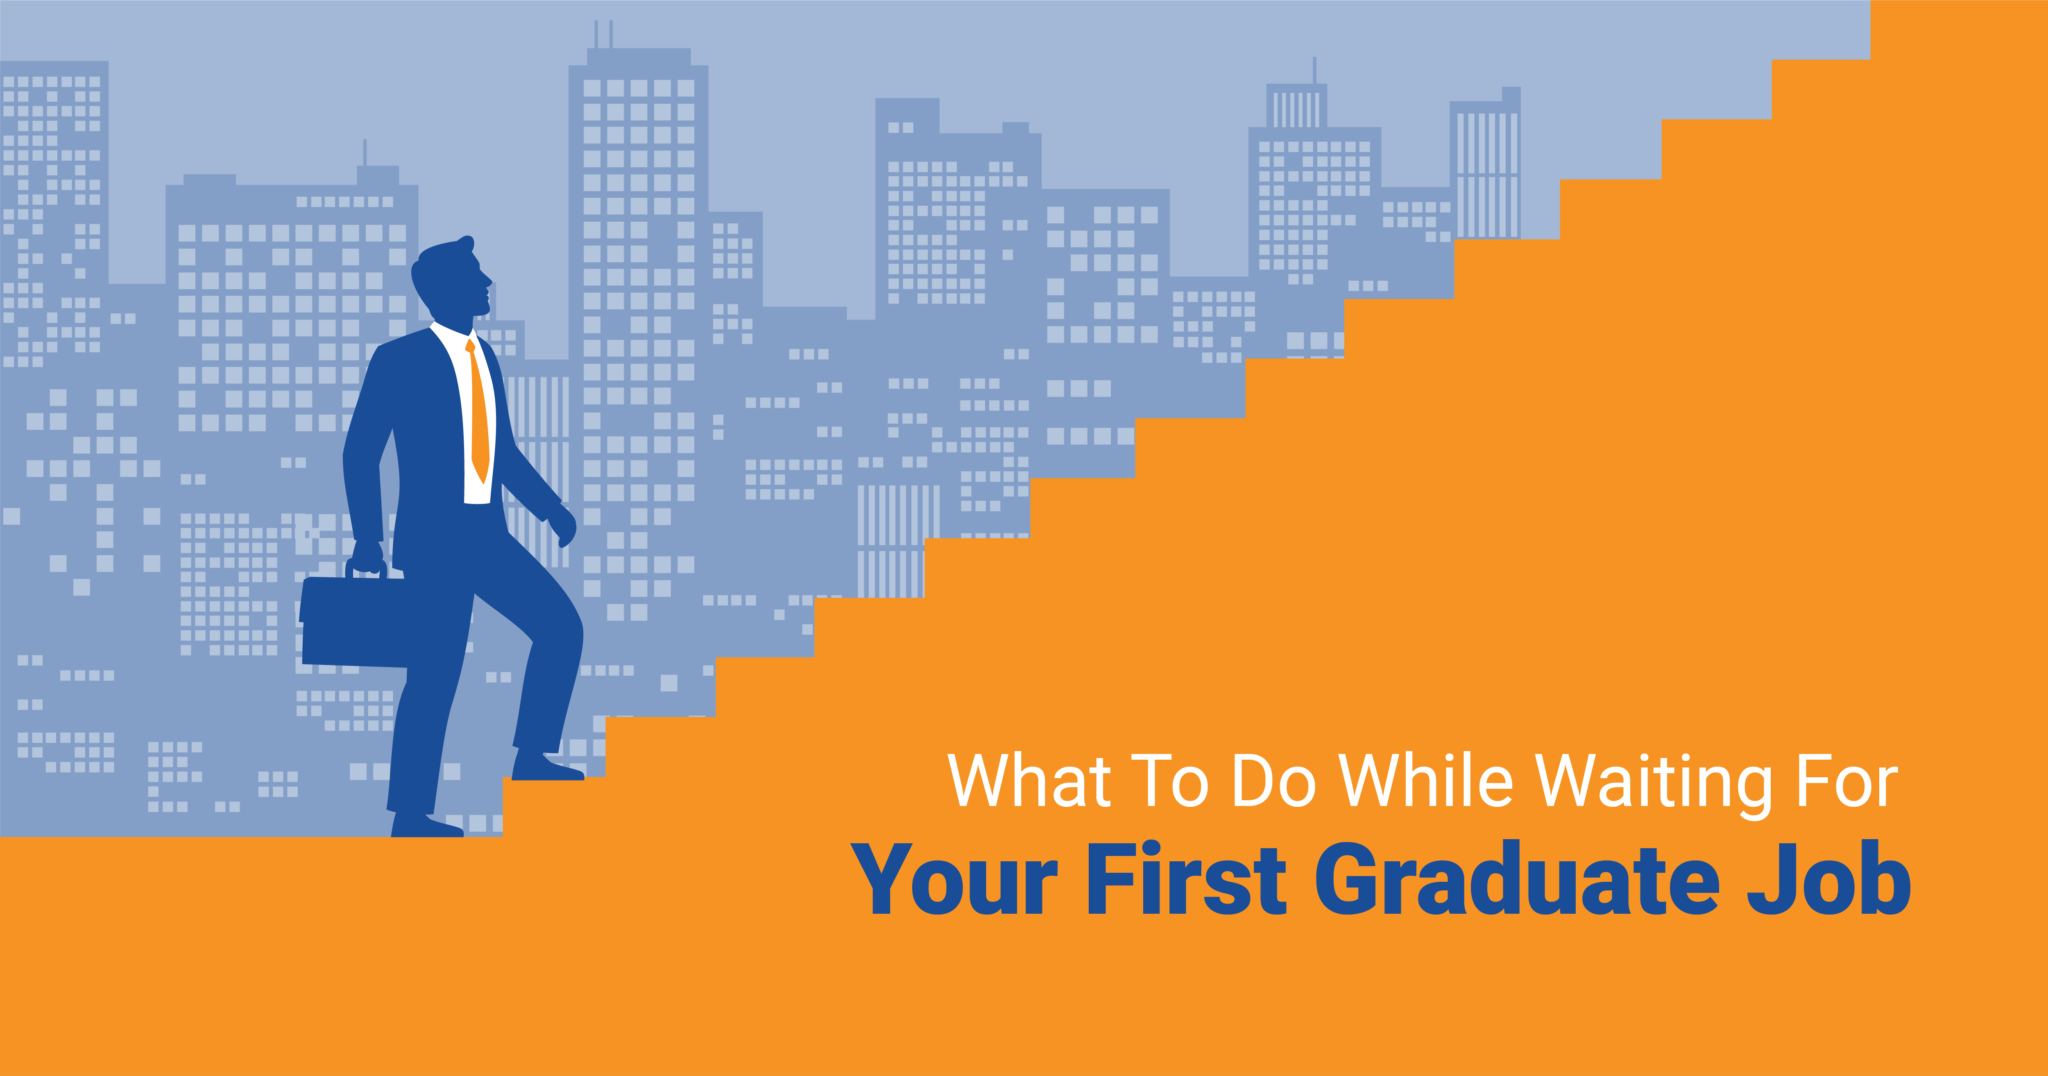 What To Do While Waiting For Your First Graduate Job